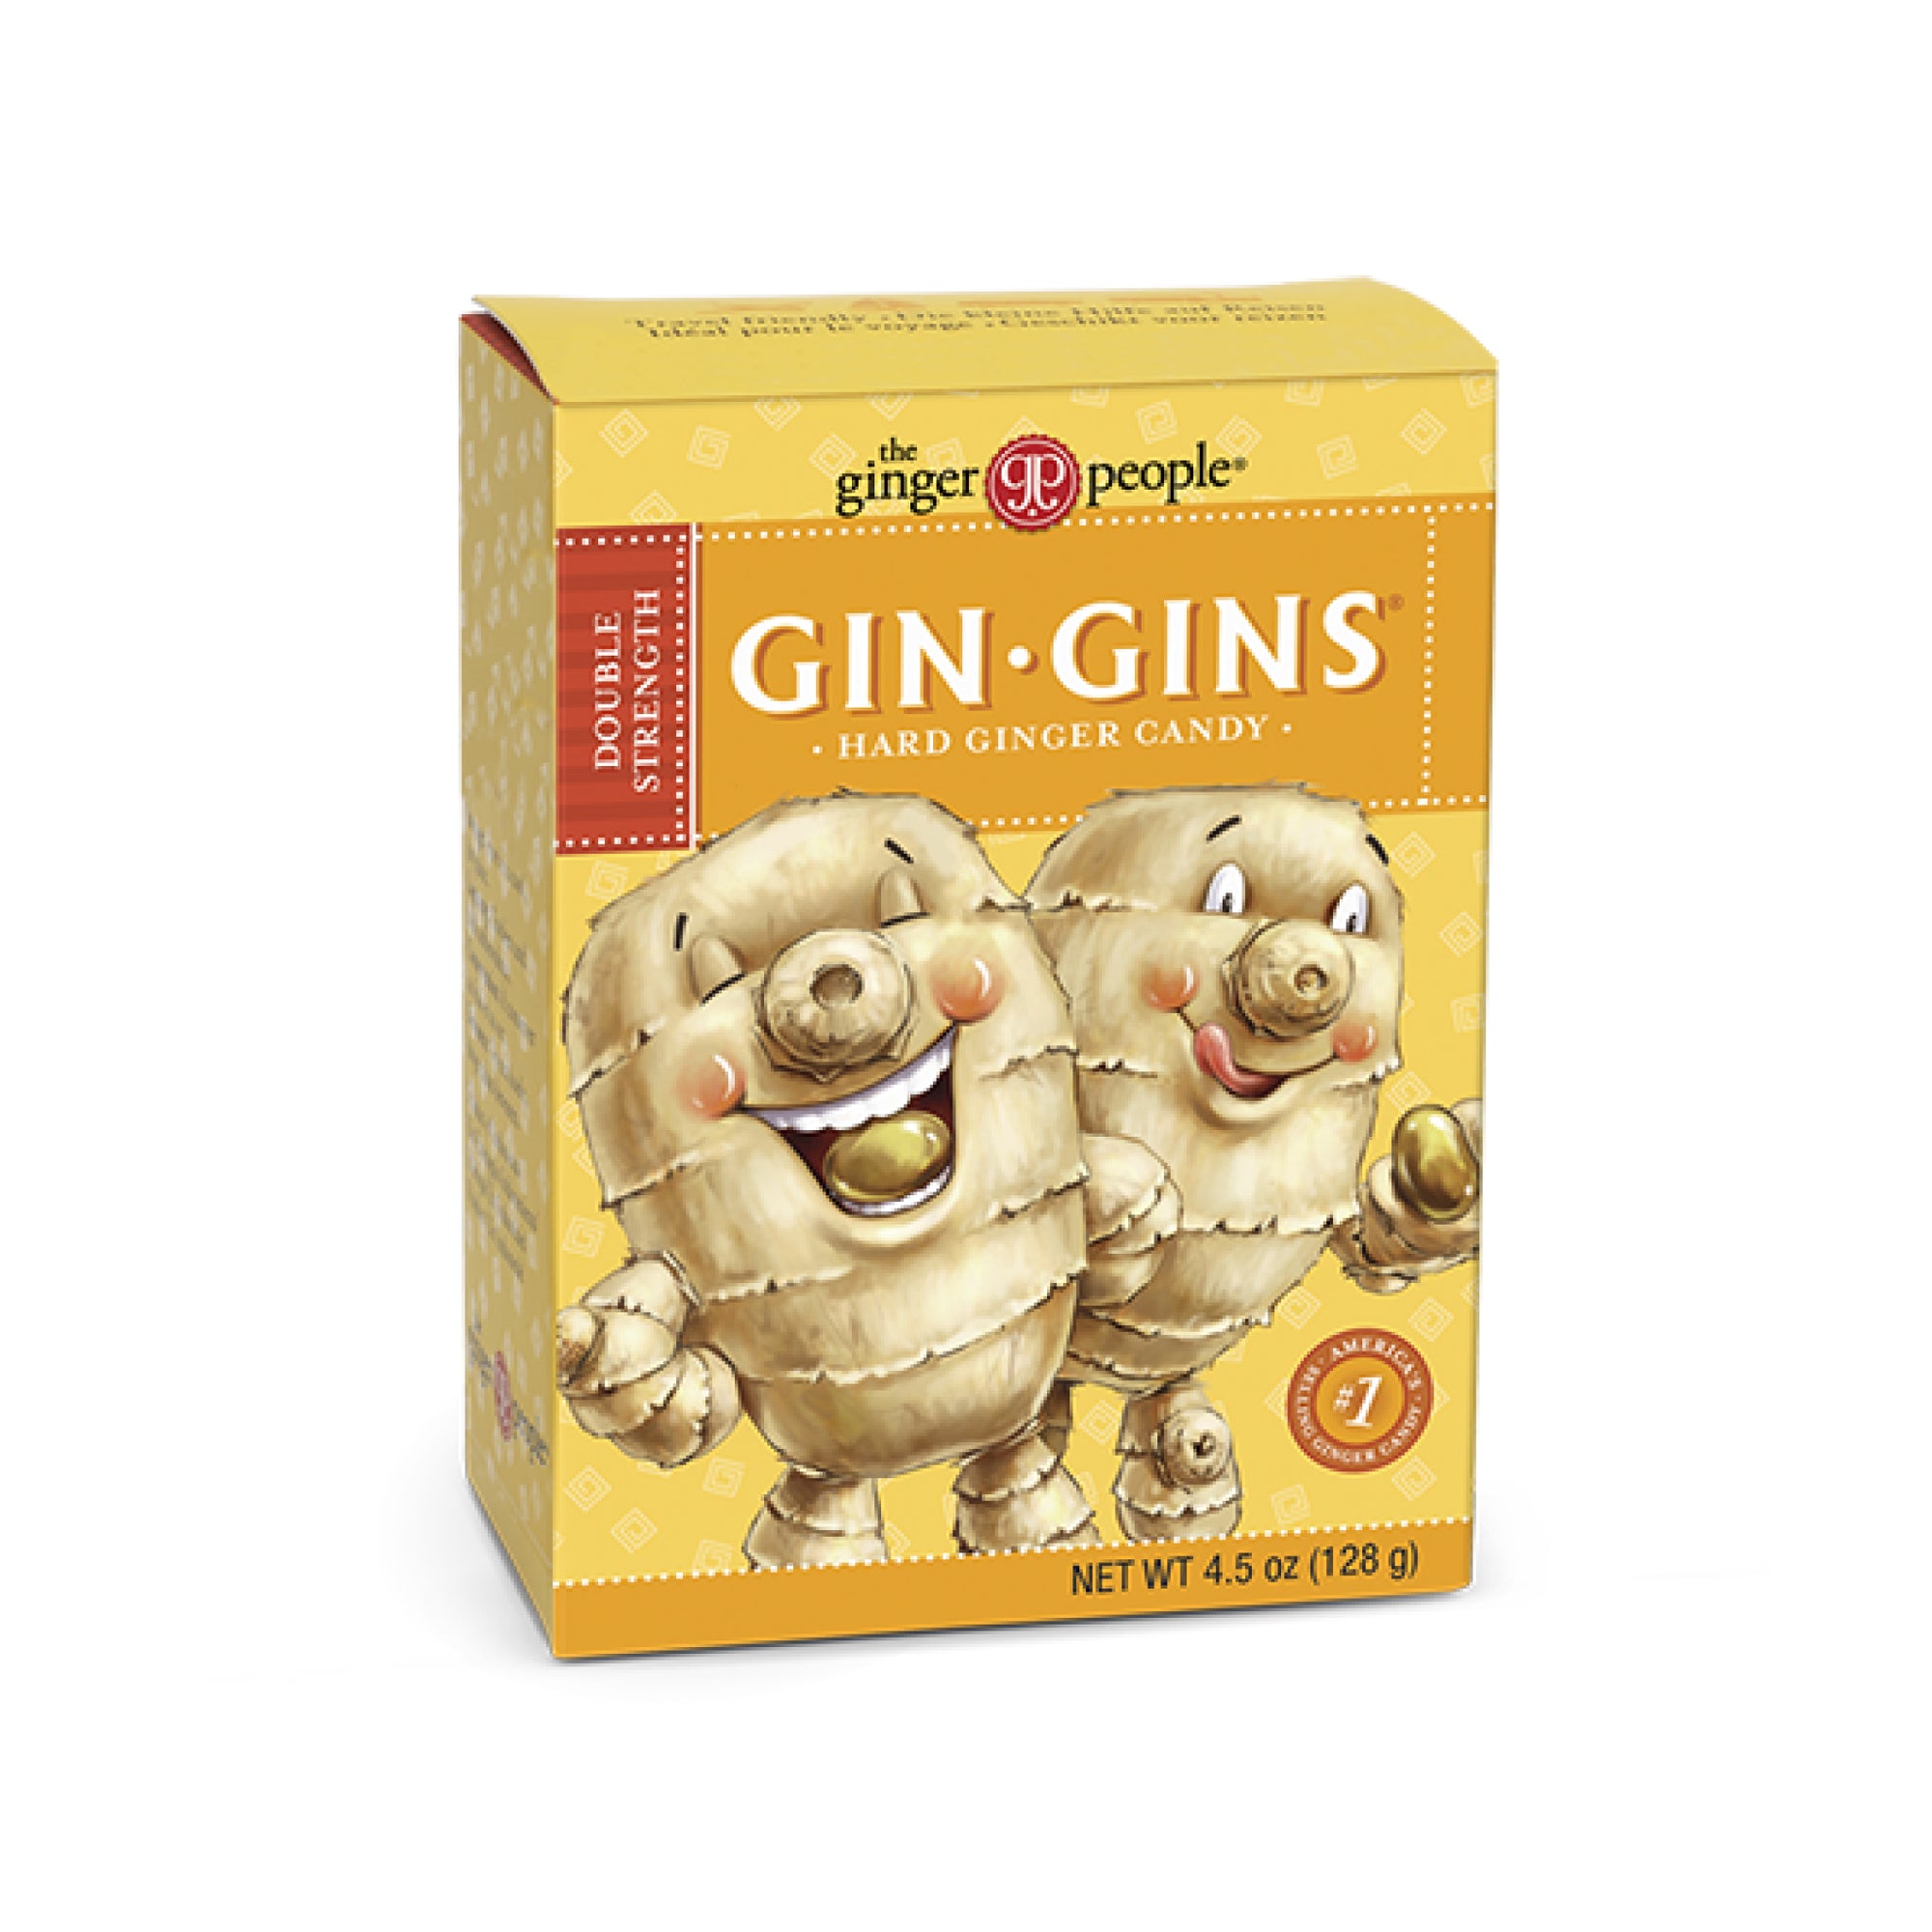 Ginger People Gin Gins Double Strength Ginger Candy 128g